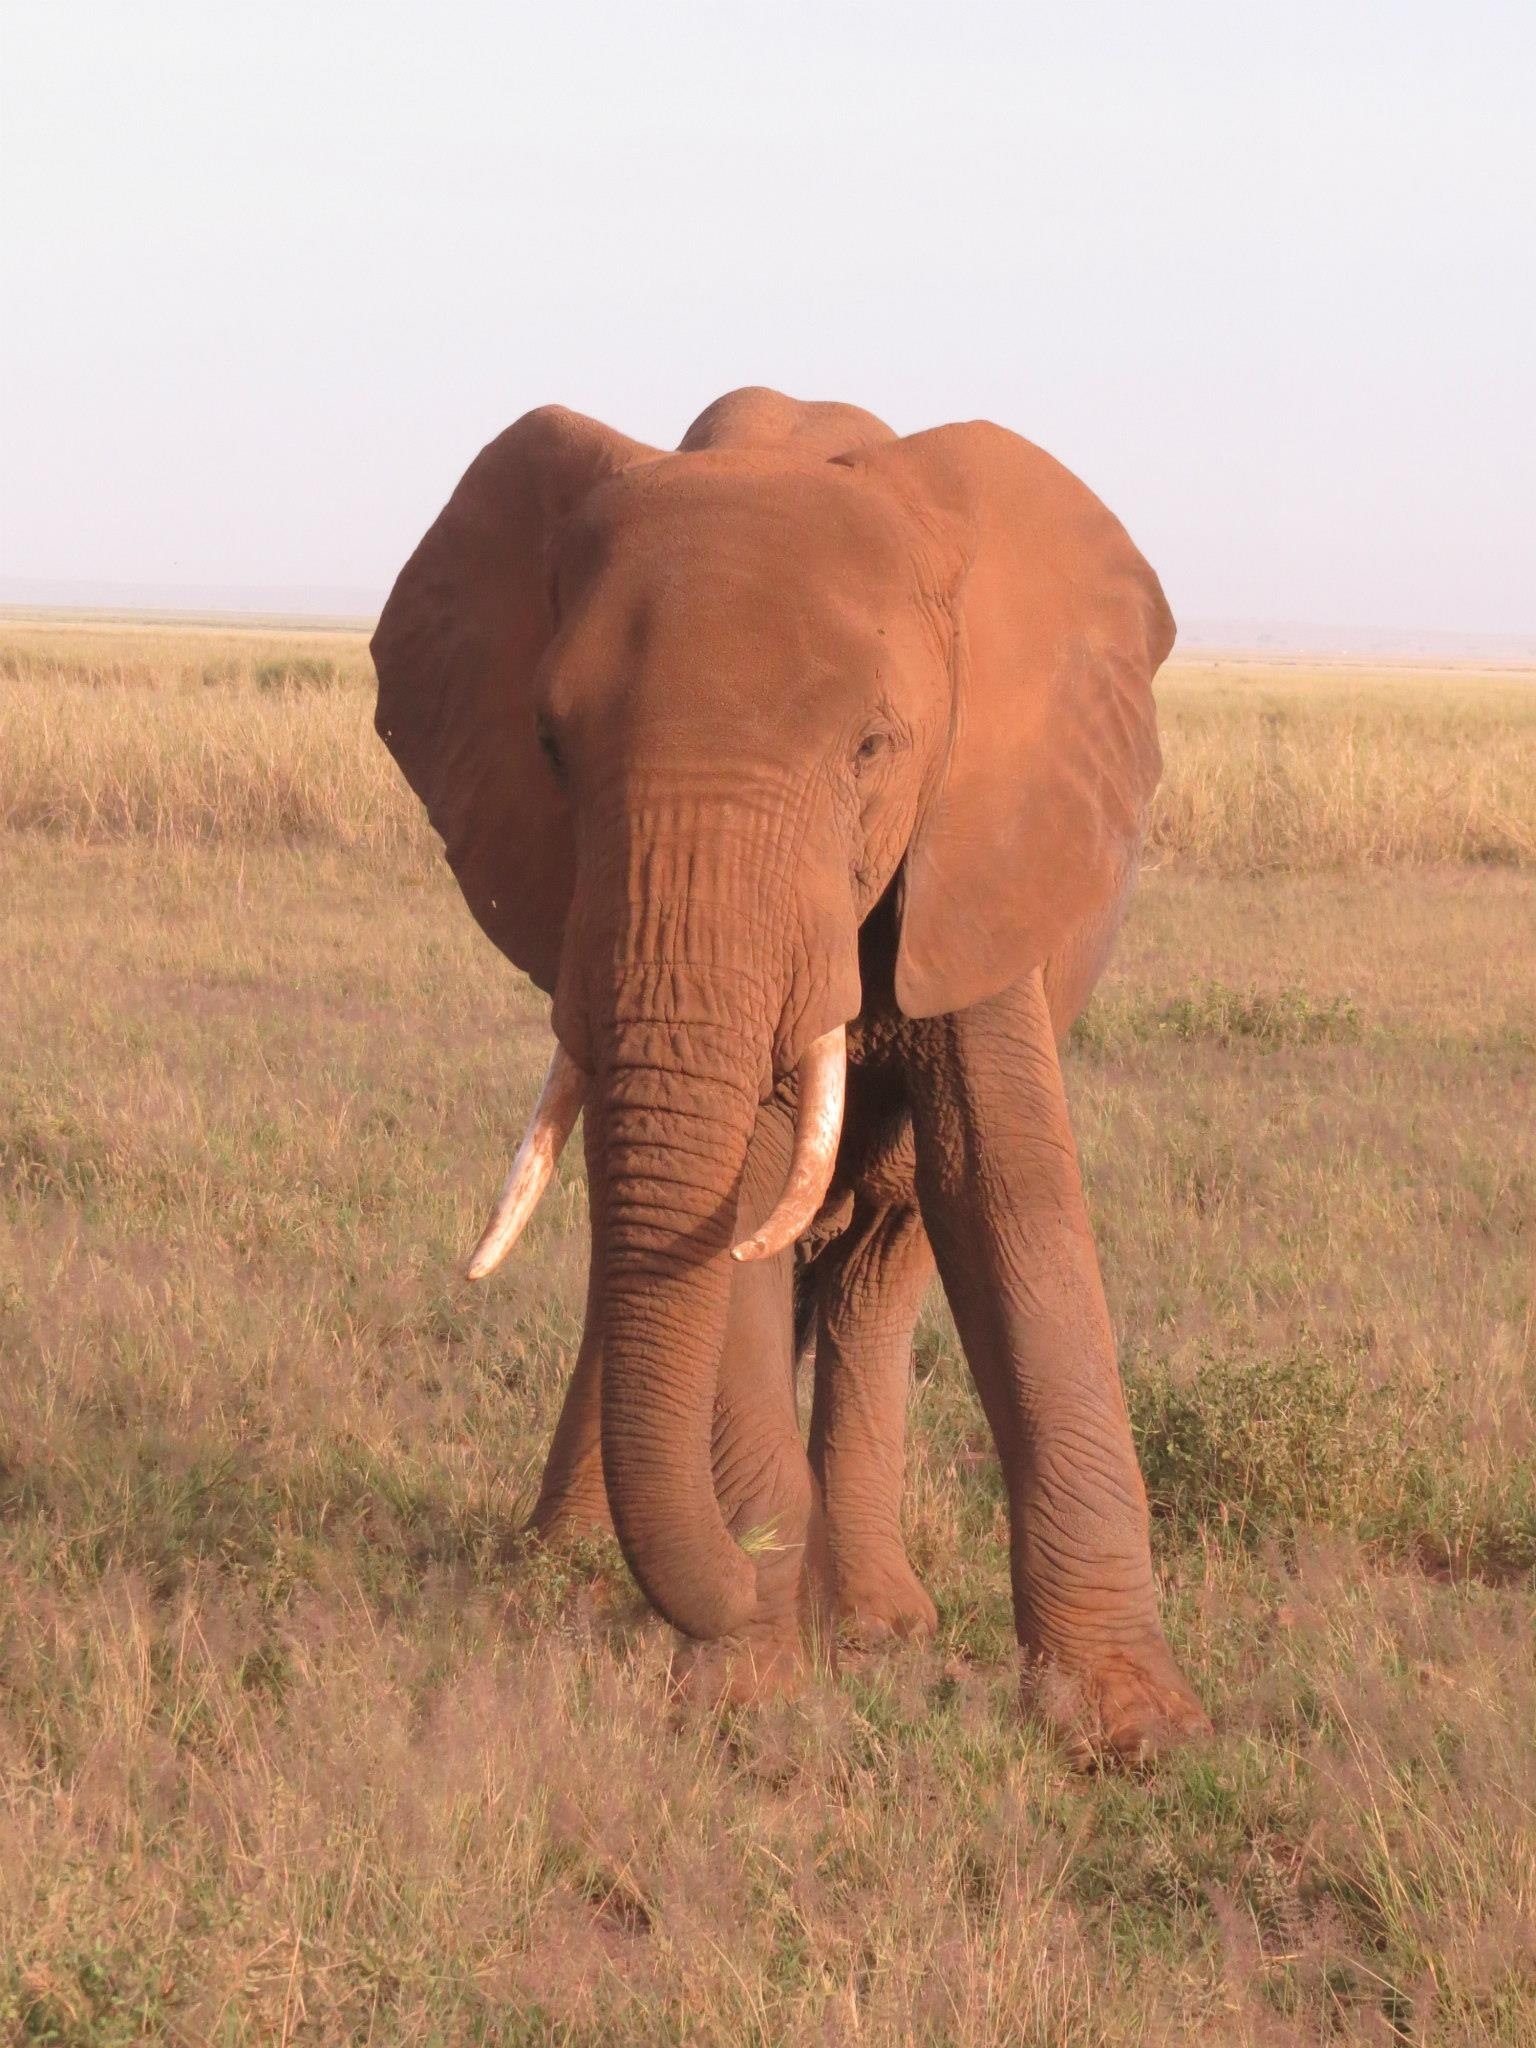 brown elephant standing on grass ground during daytime